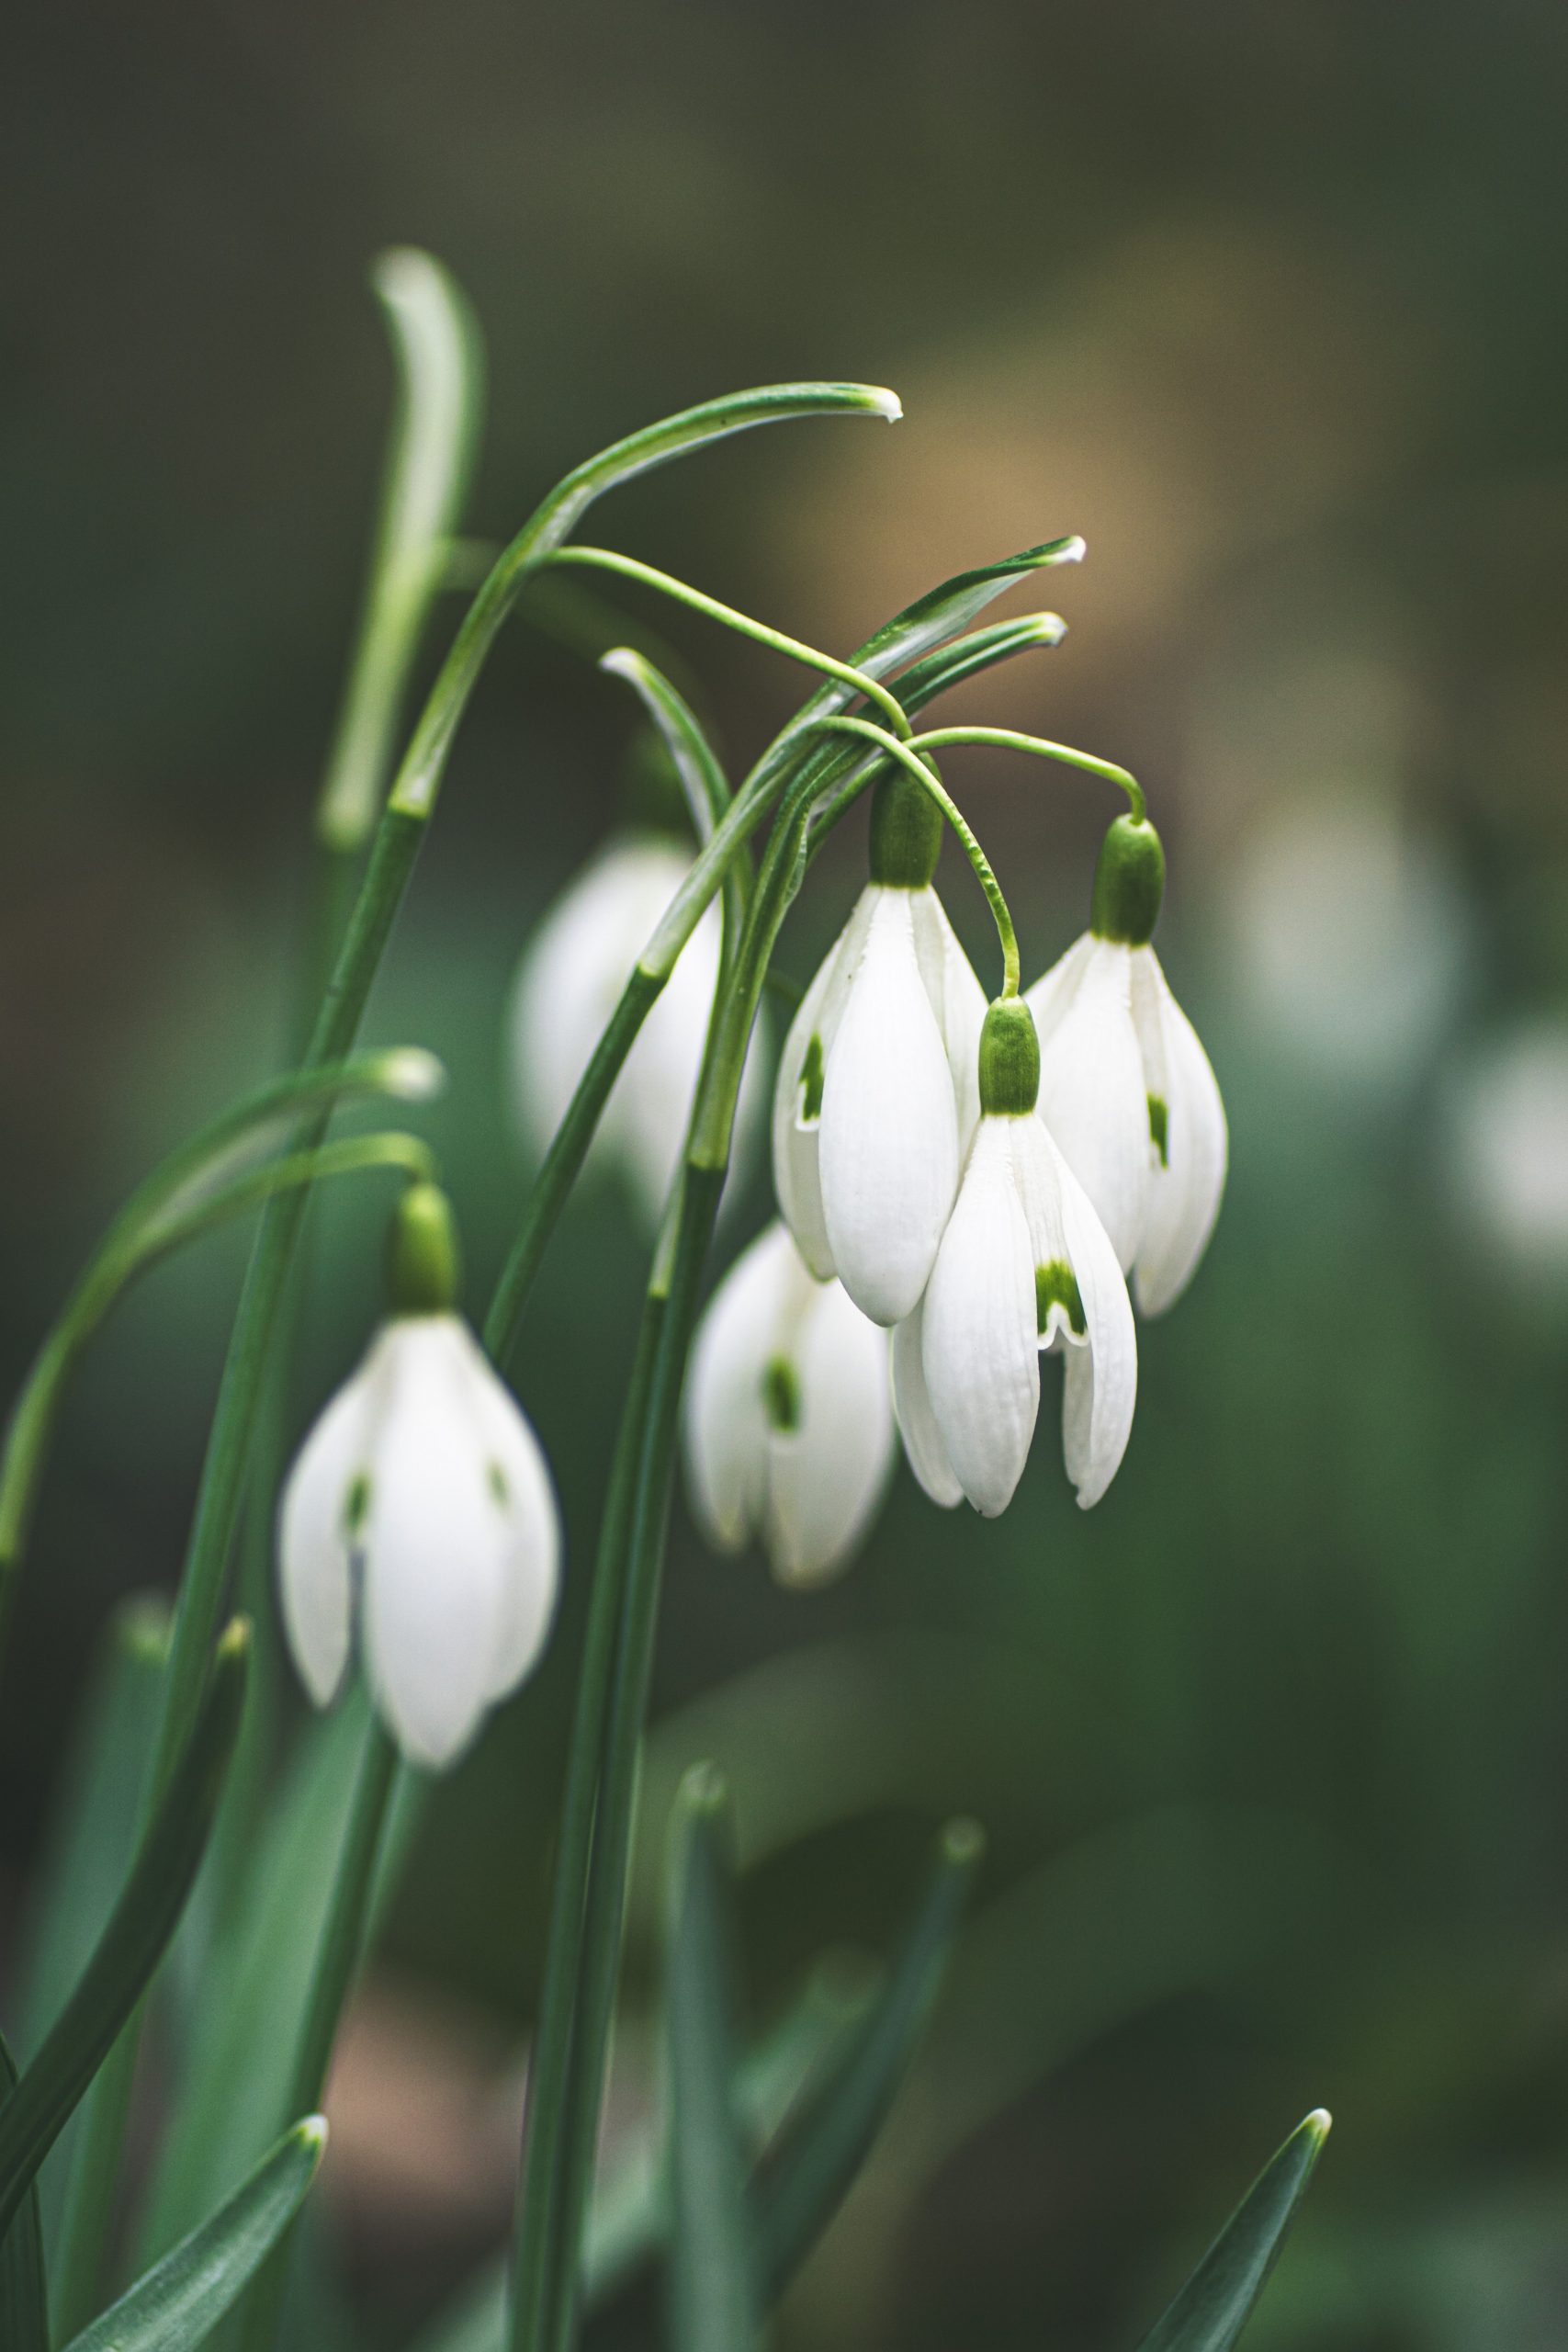 Do Snowdrops Flower The First Year?